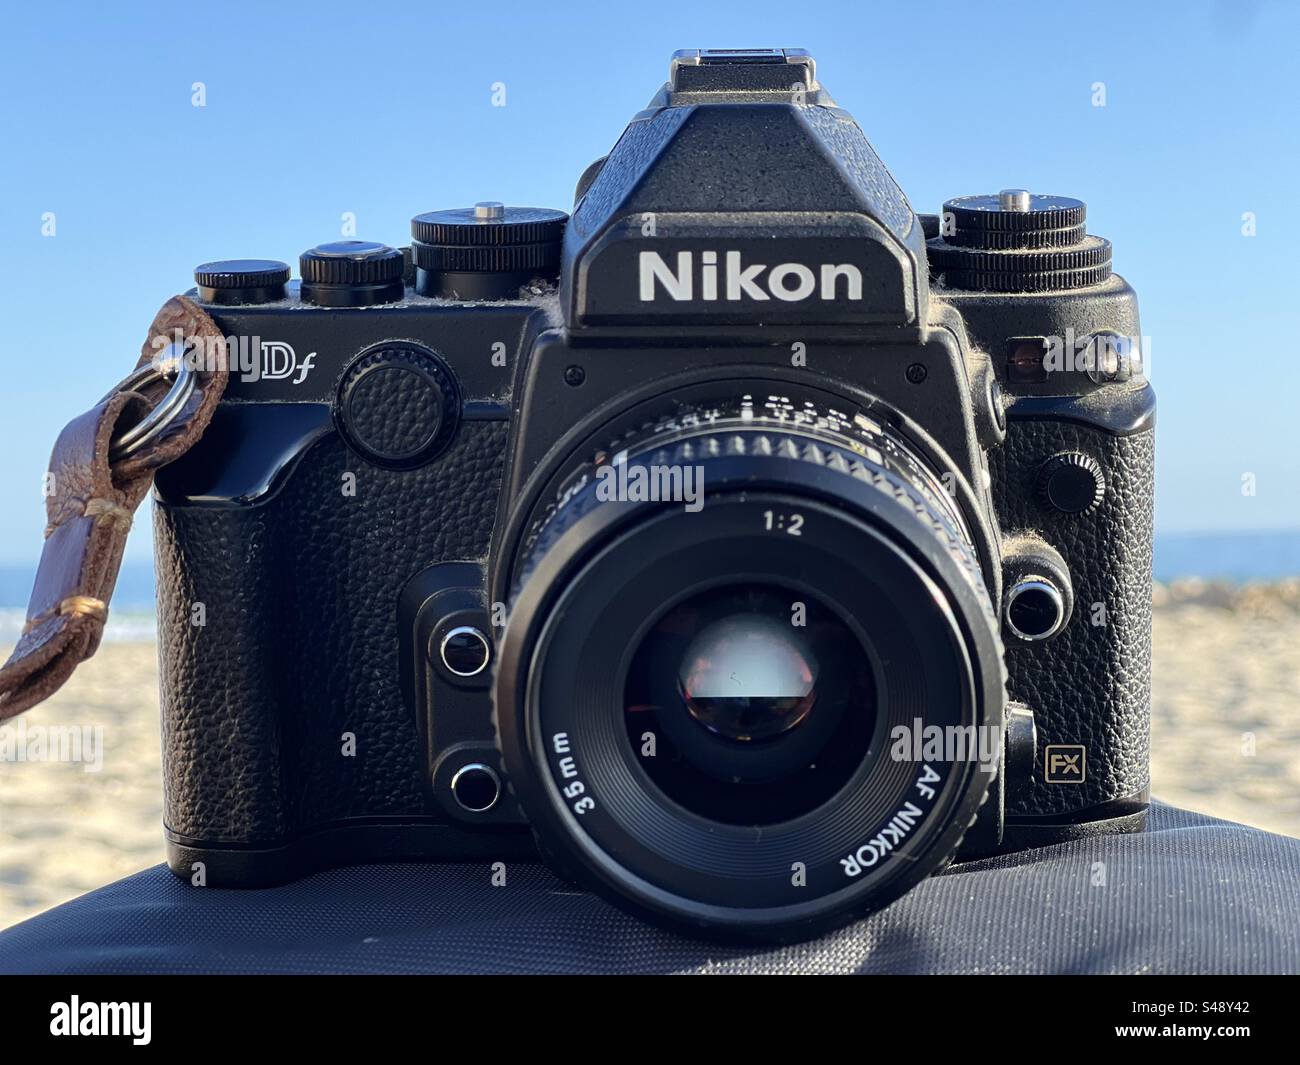 Front shot of a Nikon Df DSLR classic digital reflex camera on a car dashboard with background of breach. Stock Photo